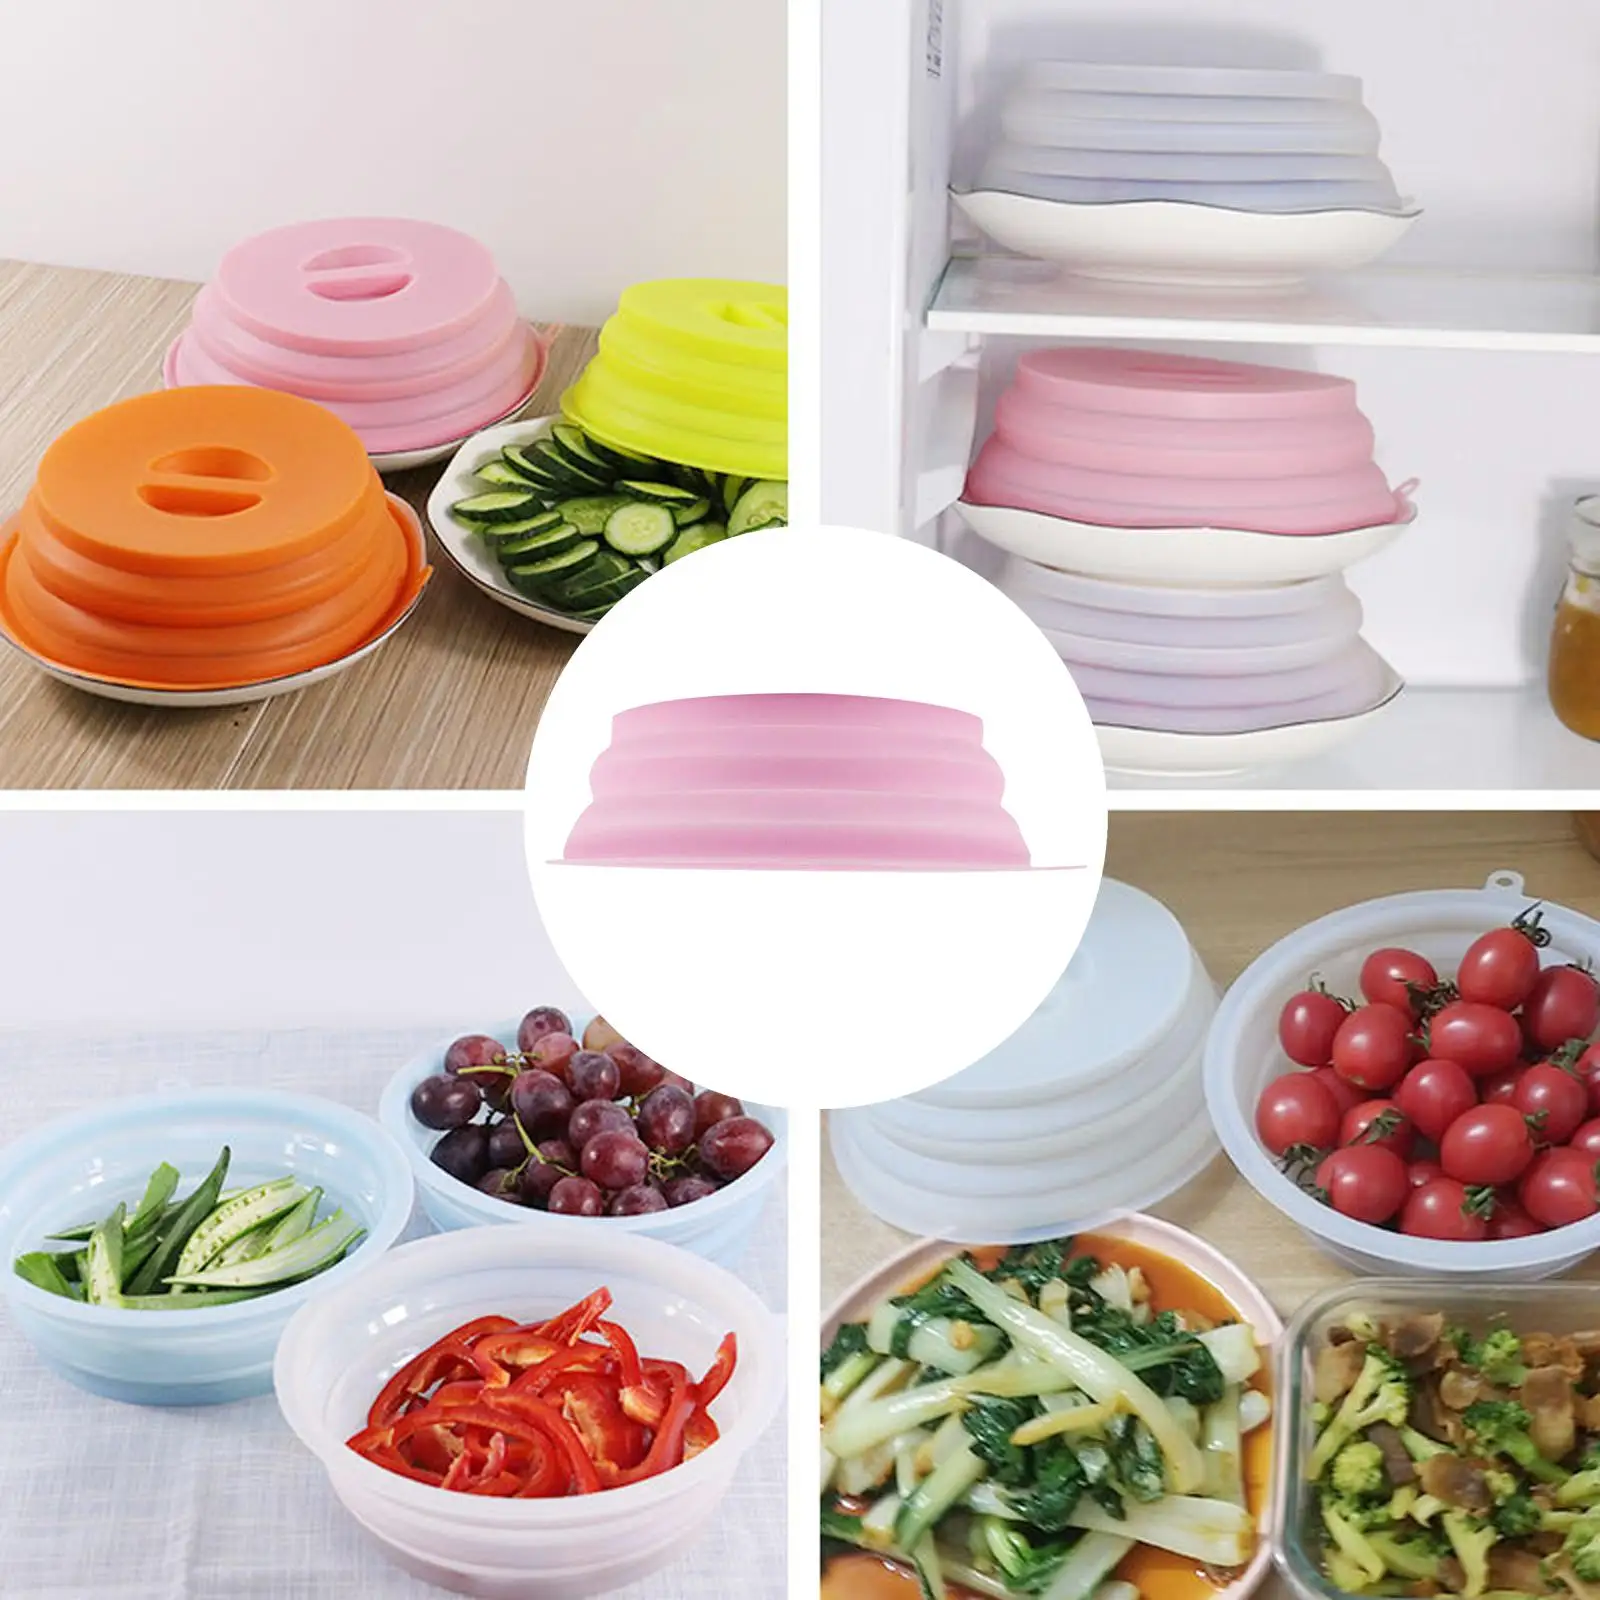 Folding Microwave Splatter Cover Plate Cover Easy Grip Stackable BPA Free for Fruit Vegetables Can Be Hung ,Dishwasher-Safe